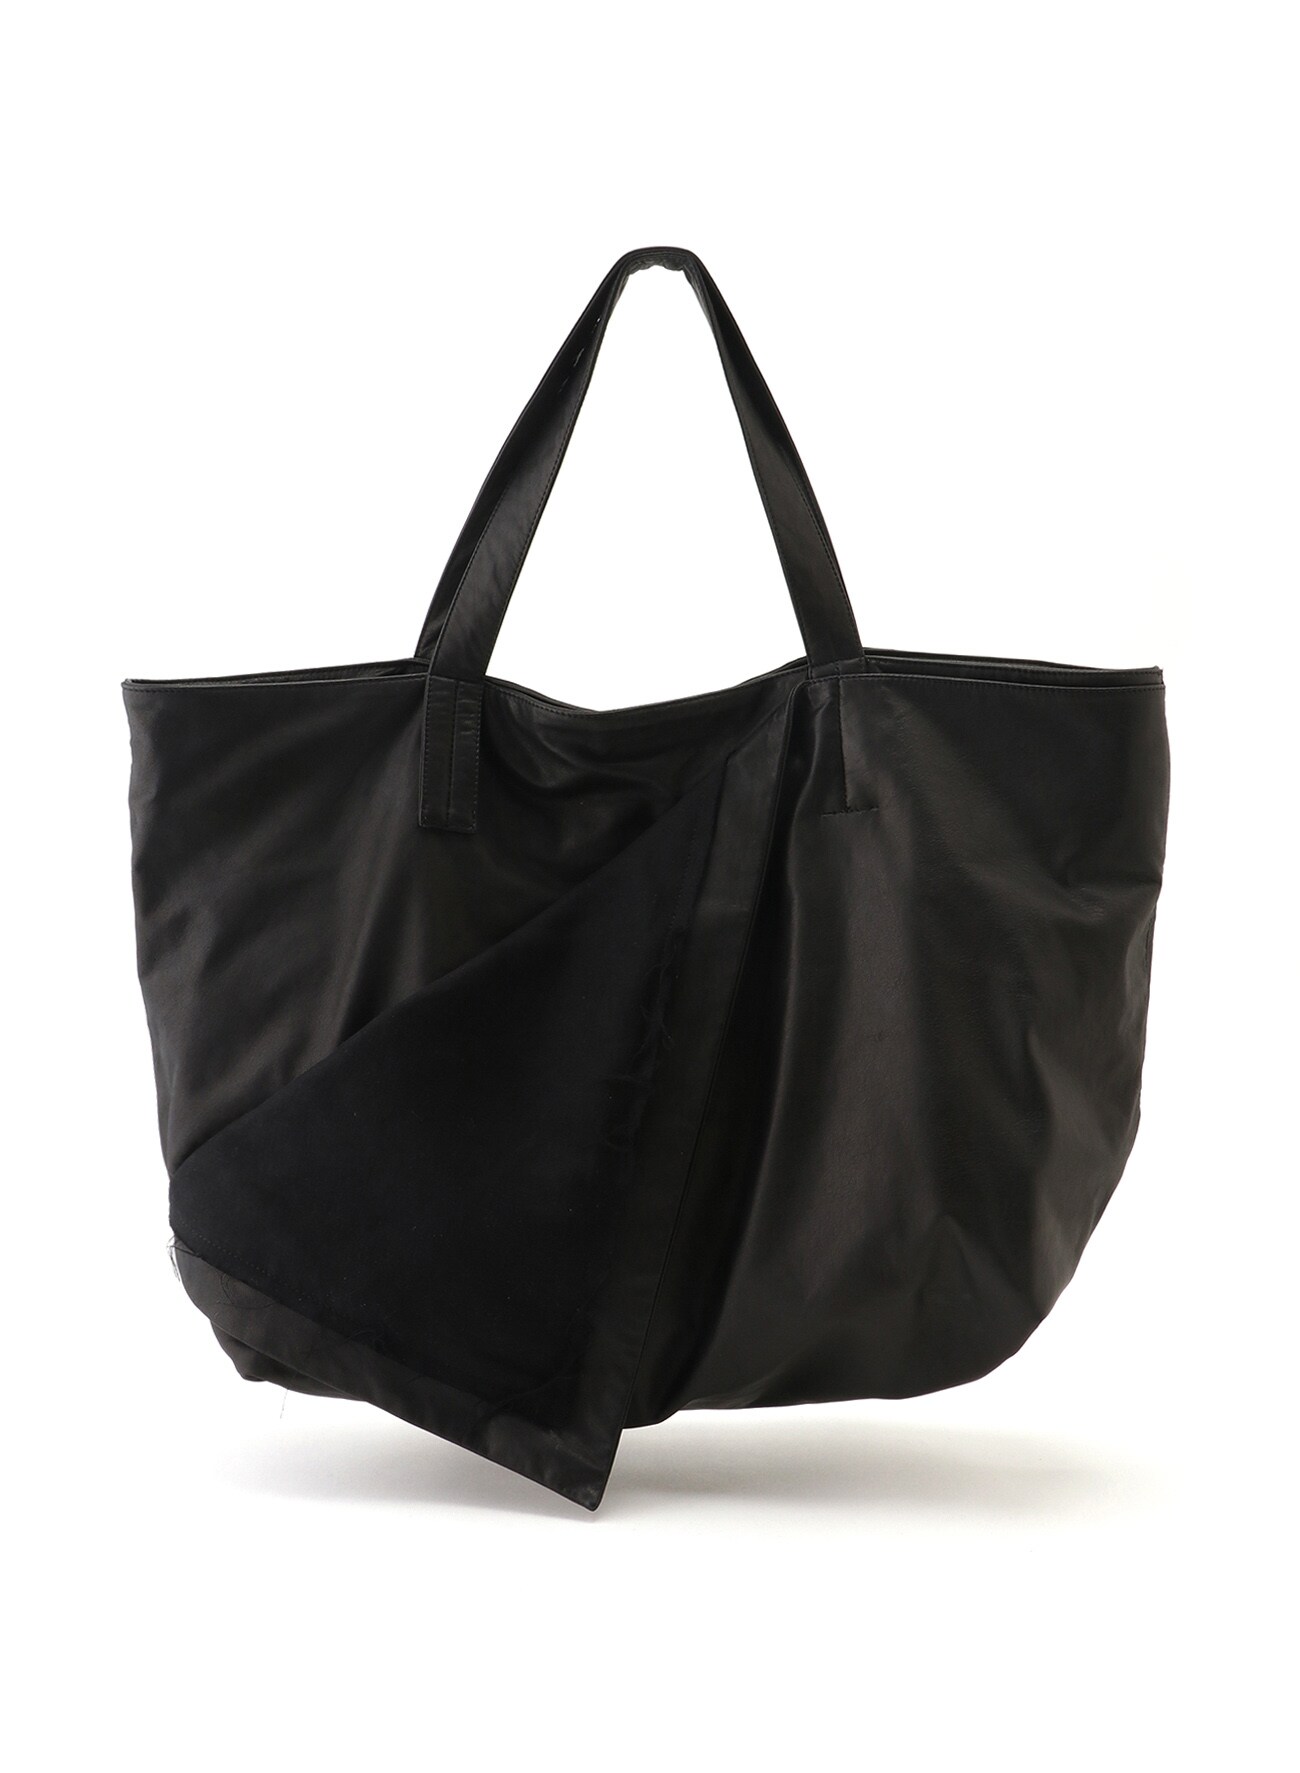 【3/2 12:00(JST) Release】PEEL TOTE（Leather）